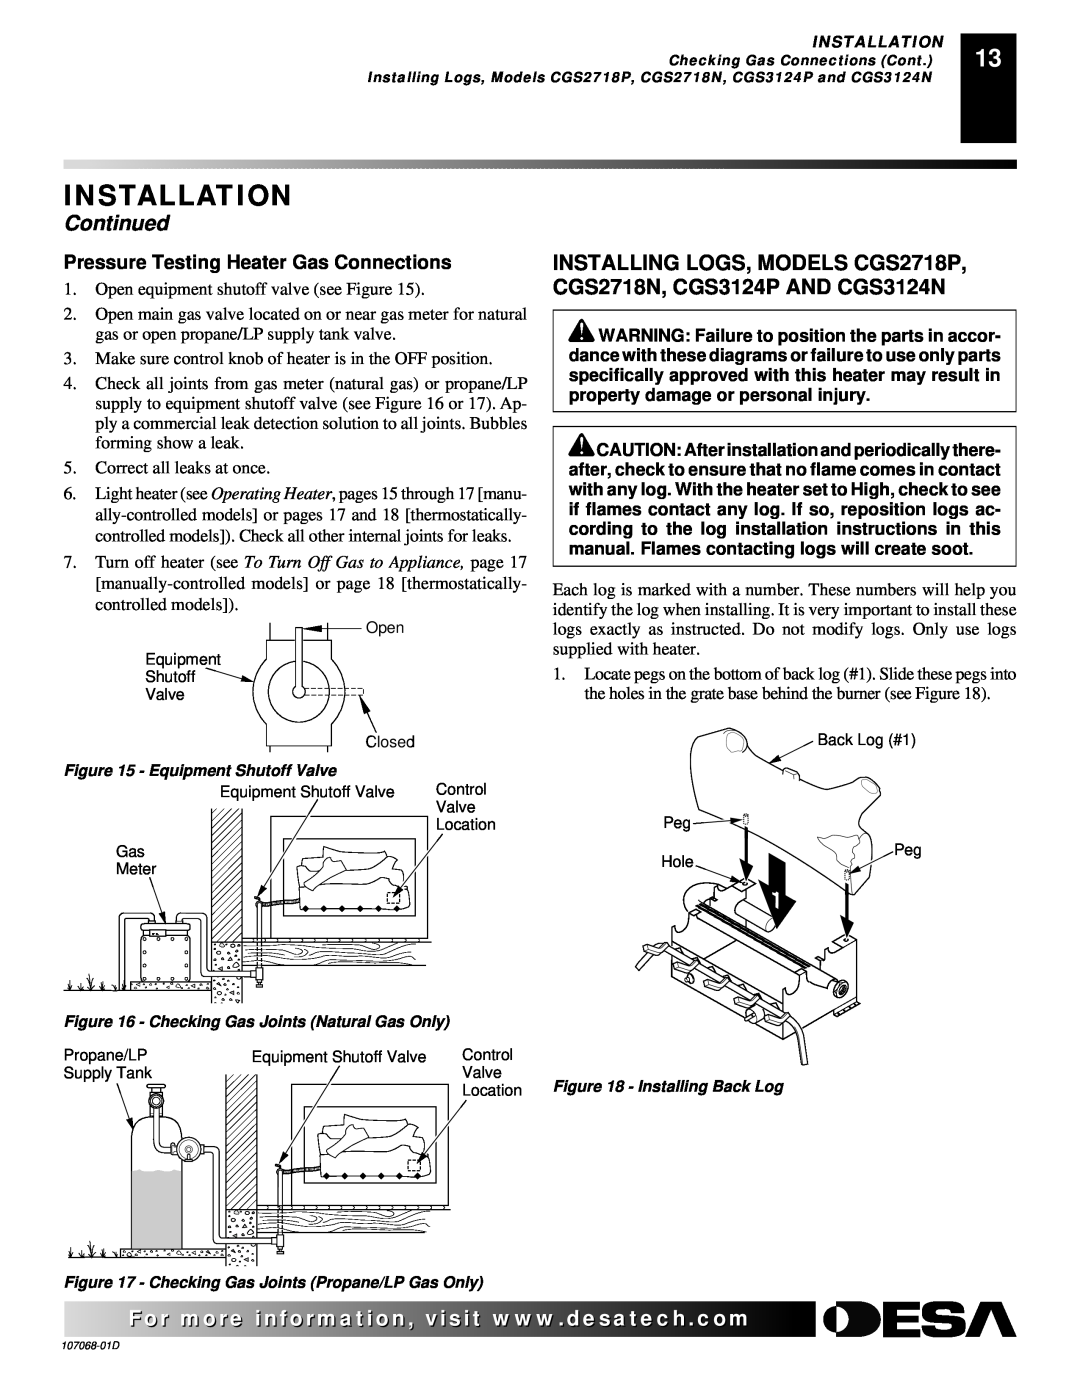 Desa CGS3124P installation manual Installation, Continued, Pressure Testing Heater Gas Connections 